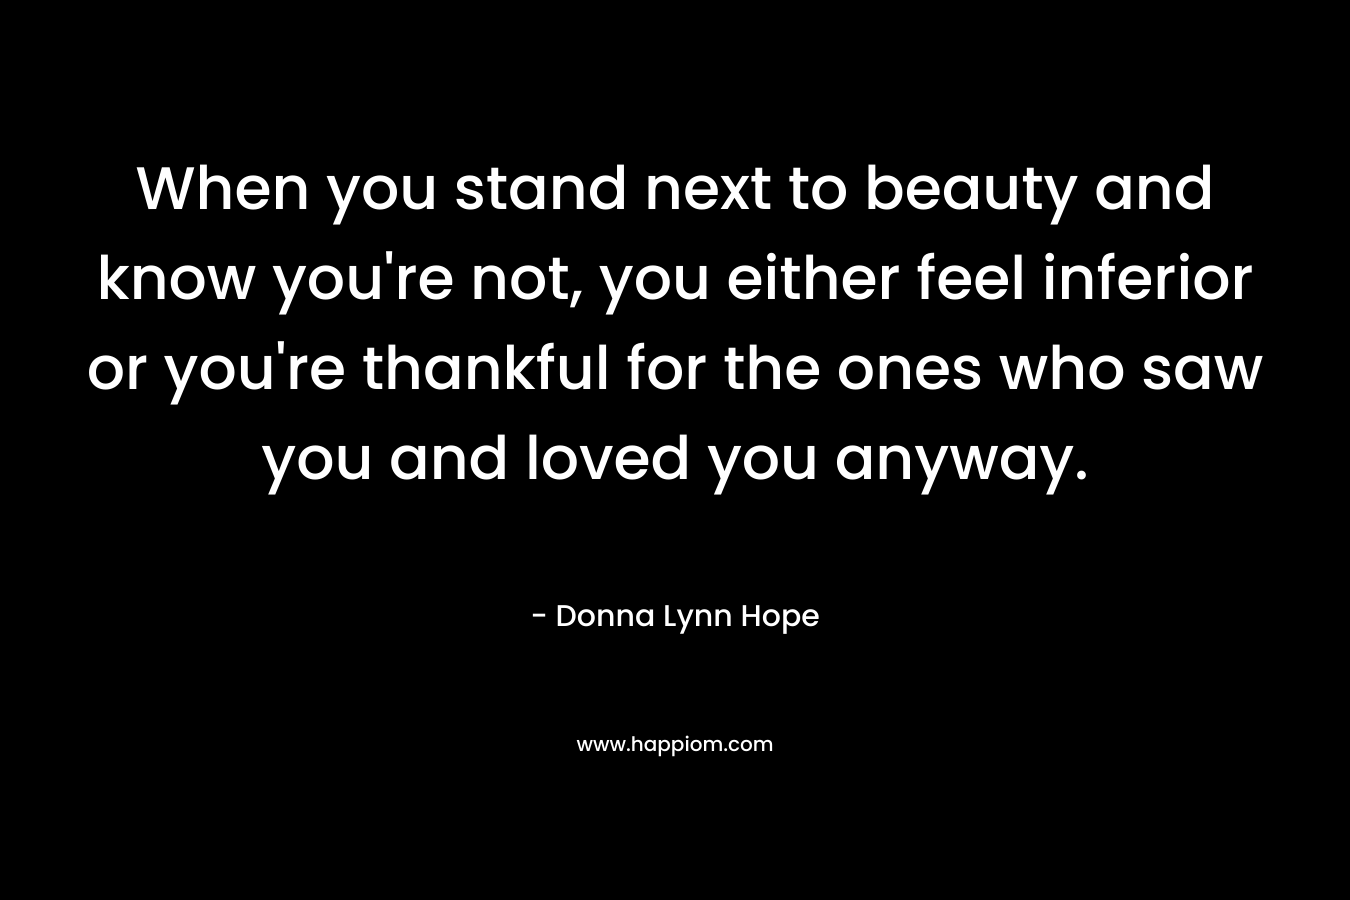 When you stand next to beauty and know you’re not, you either feel inferior or you’re thankful for the ones who saw you and loved you anyway. – Donna Lynn Hope